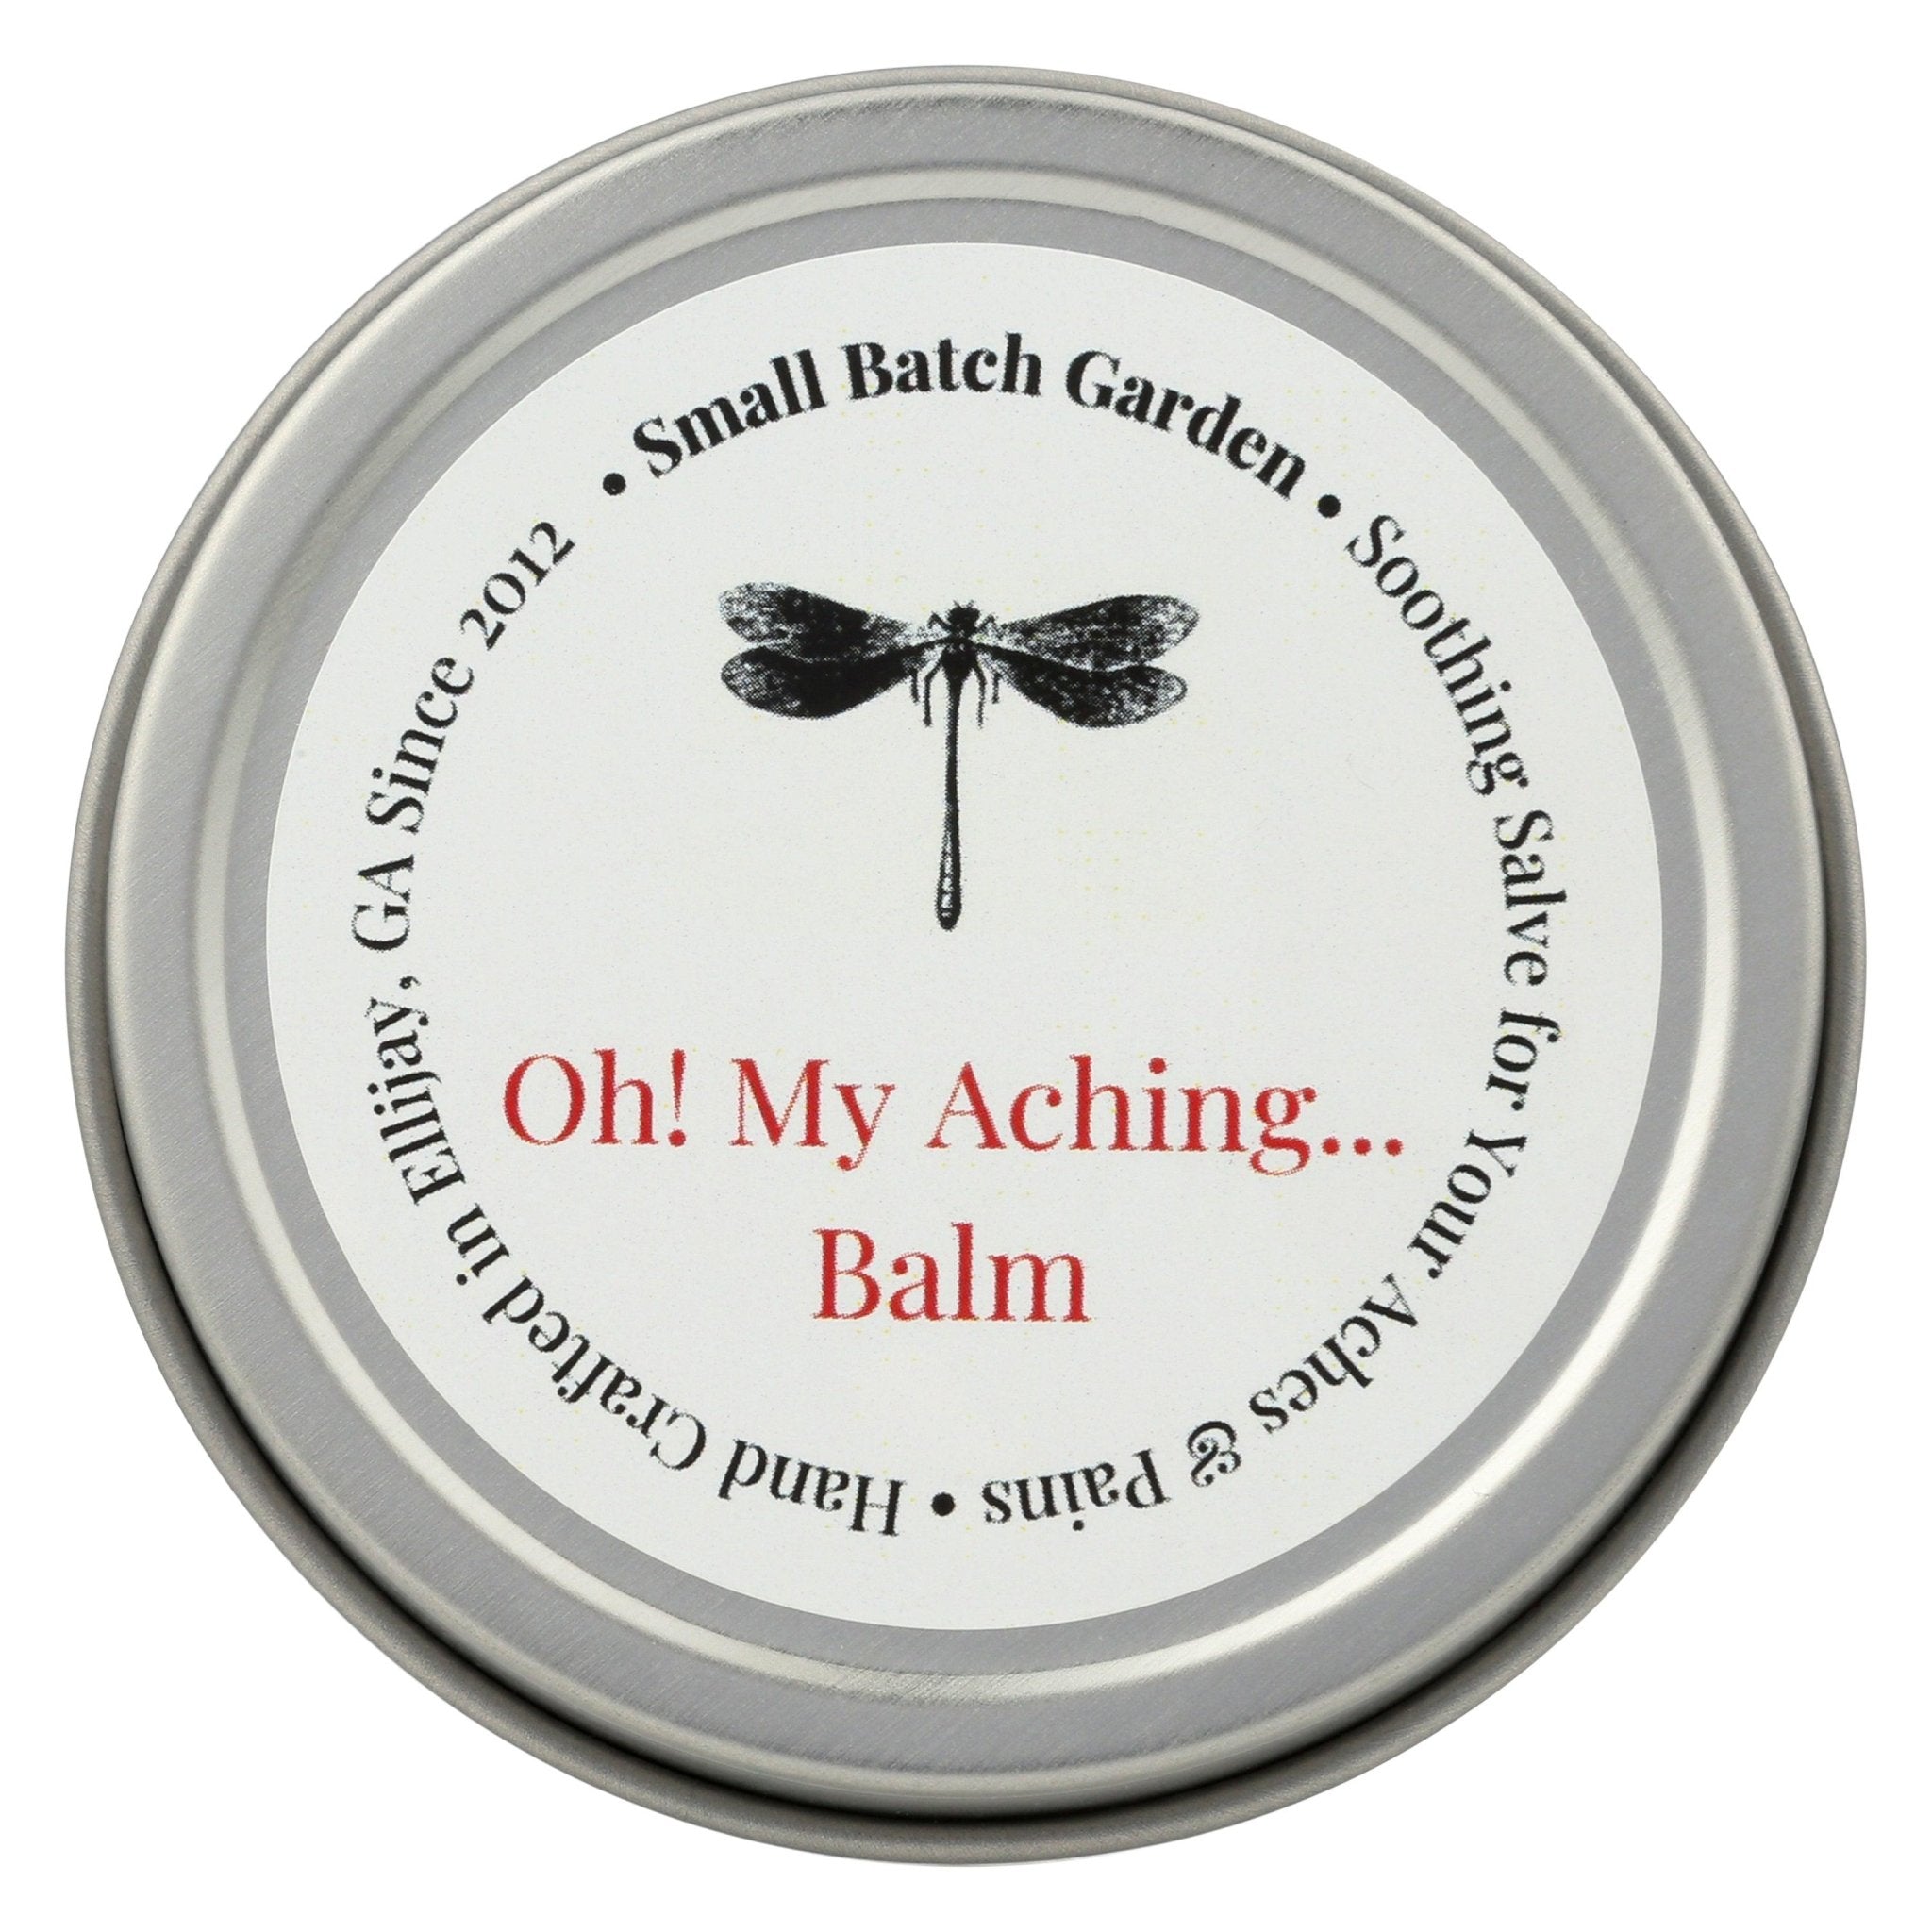 Oh! My Aching...Balm ~ Natural Herbal Chest and Muscle Rub ~ Relief from Sinus Congestion, Aches & Pains - Small Batch Garden